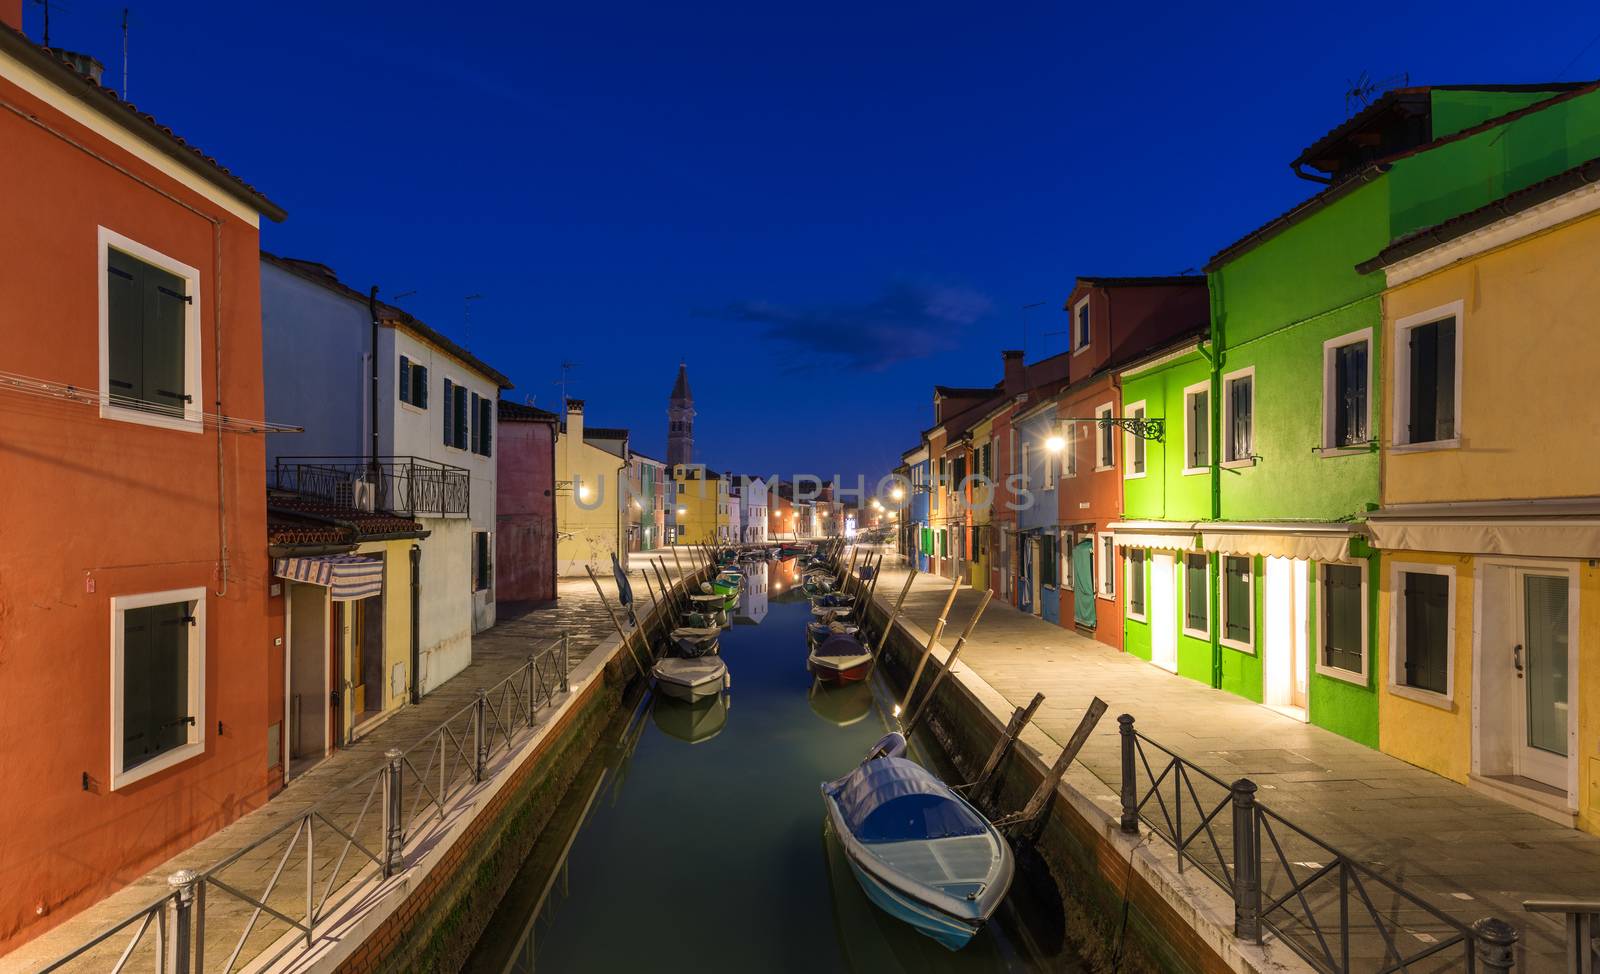 Street view with colorful buildings in Burano island at night, Venice, Italy. Architecture and landmarks of Burano, Venice postcard. Scenic canal and colorful architecture in Burano island near Venice, Italy